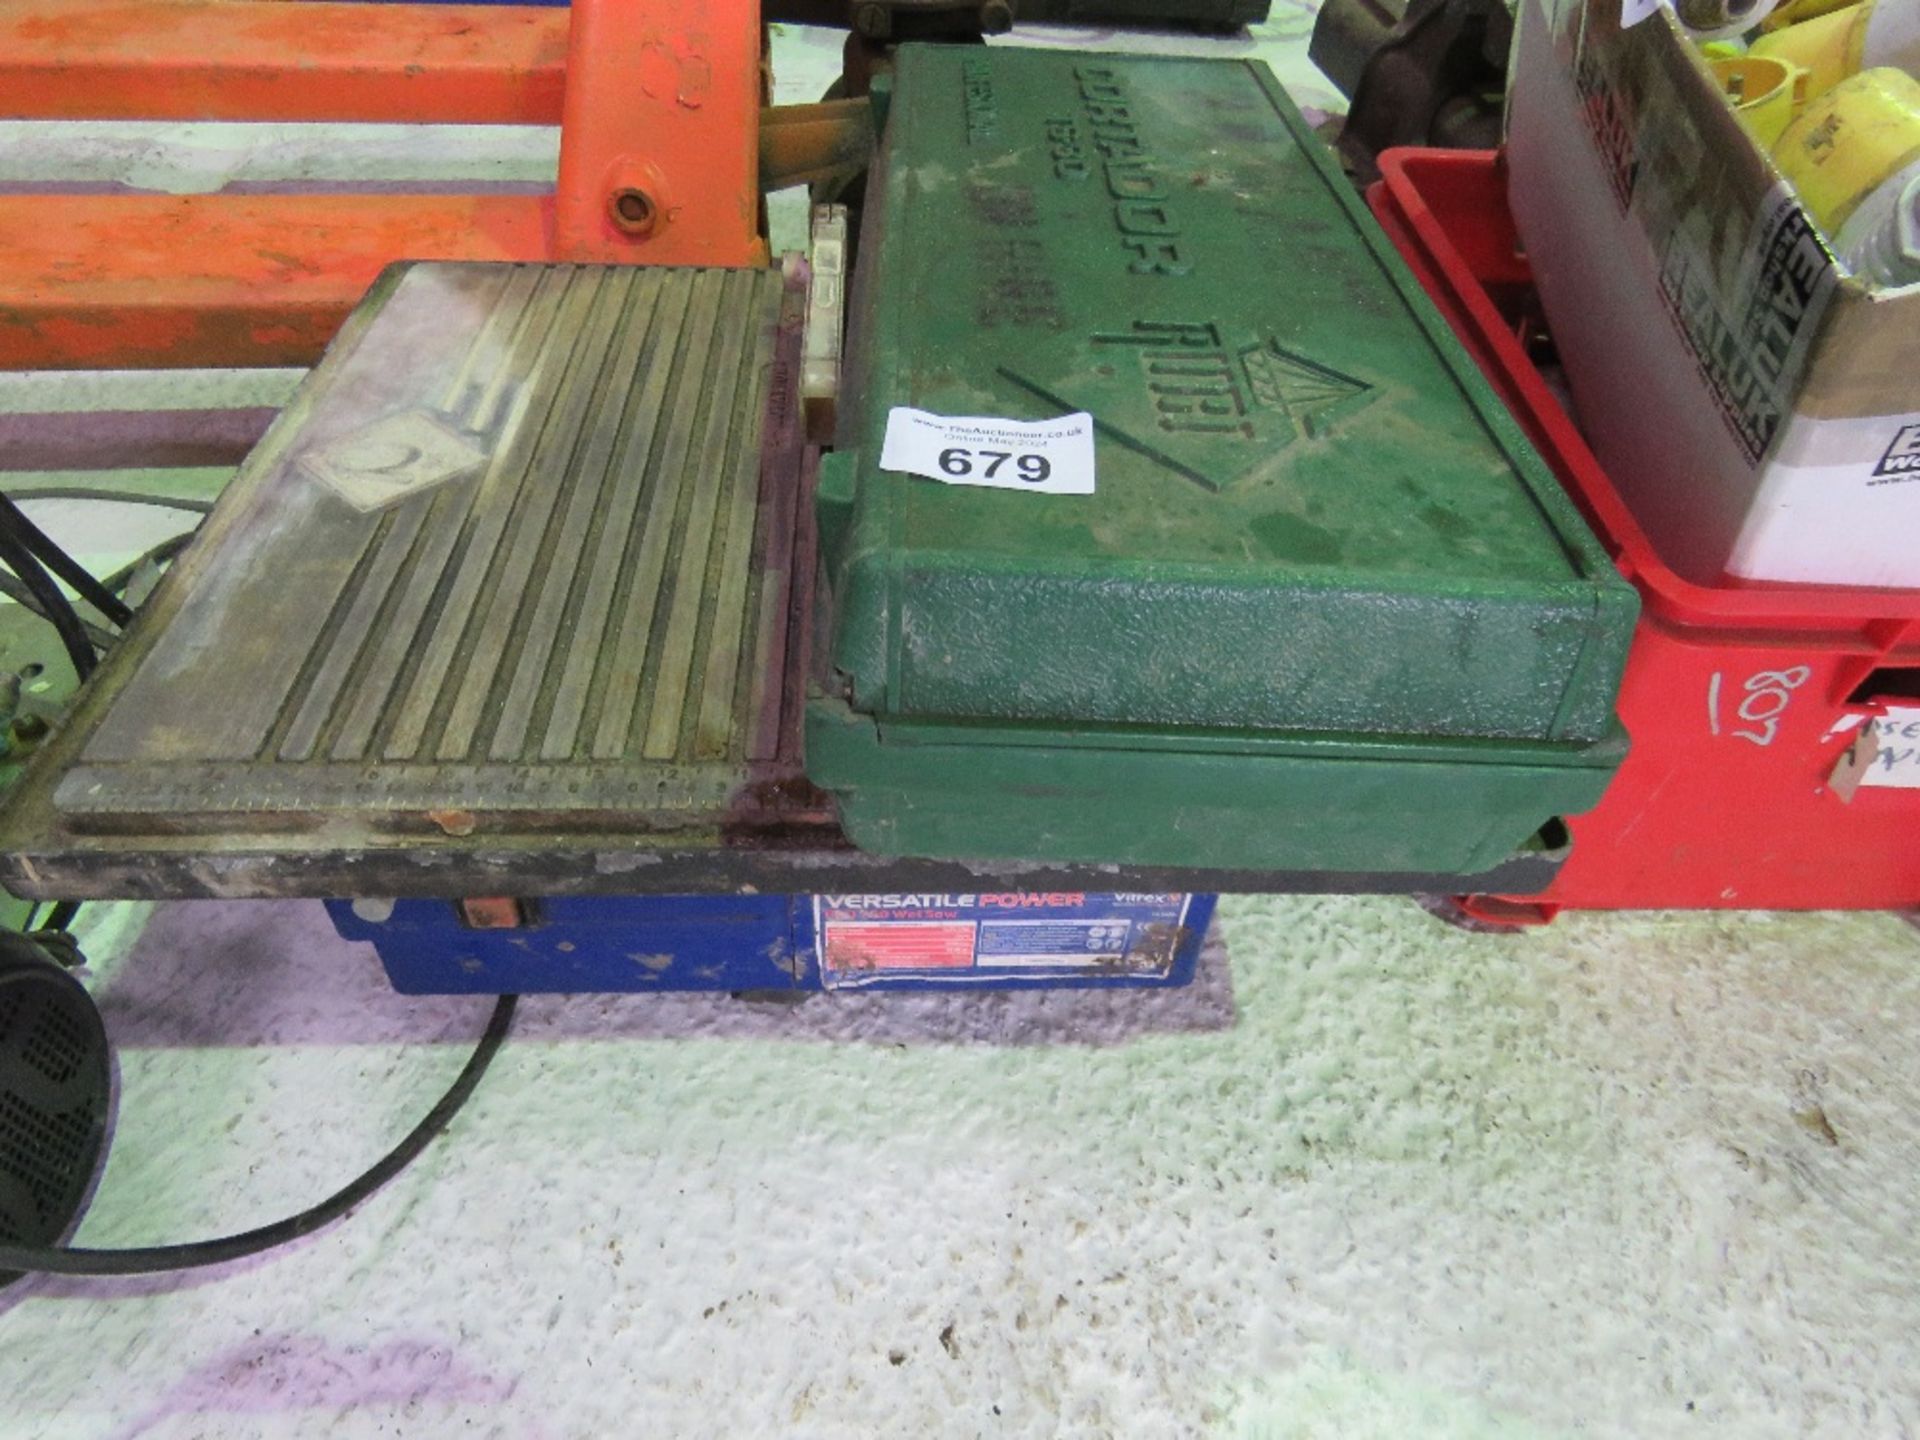 TILE SAW 240VOLT POWERED PLUS A MANUAL TILE CUTTER.....THIS LOT IS SOLD UNDER THE AUCTIONEERS MARGI